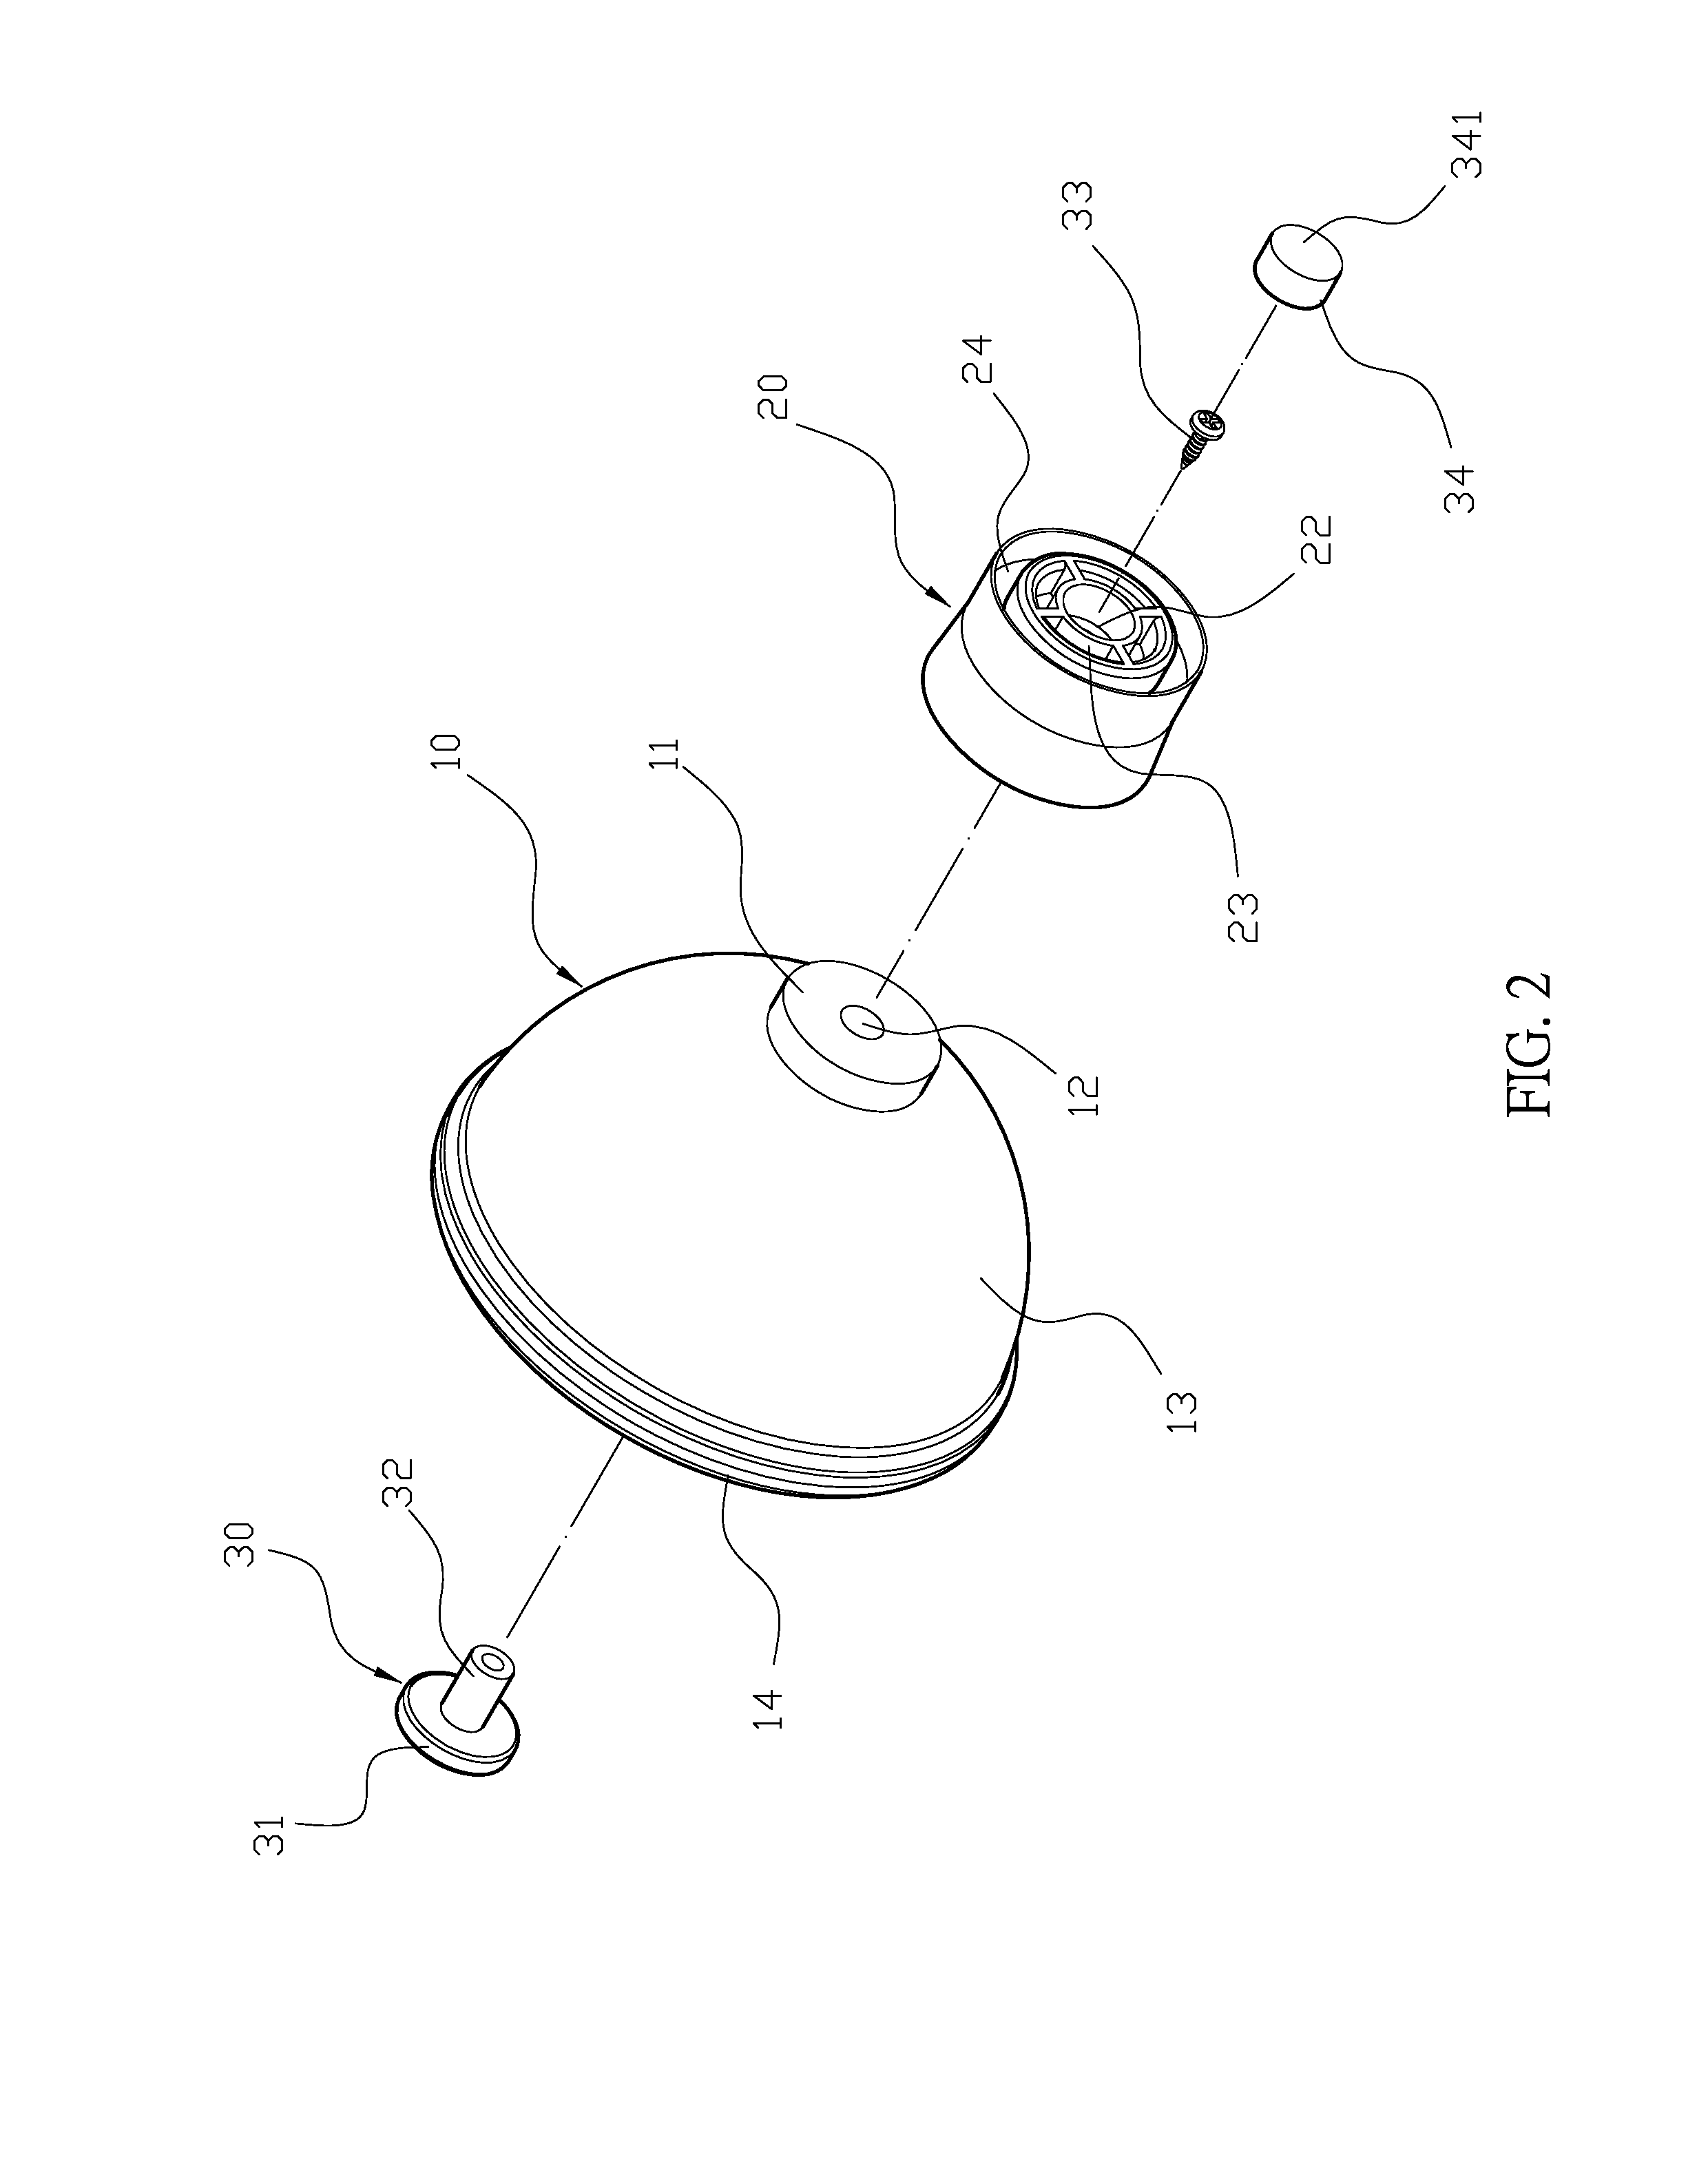 Positioning structure of plastic disk of massaging device